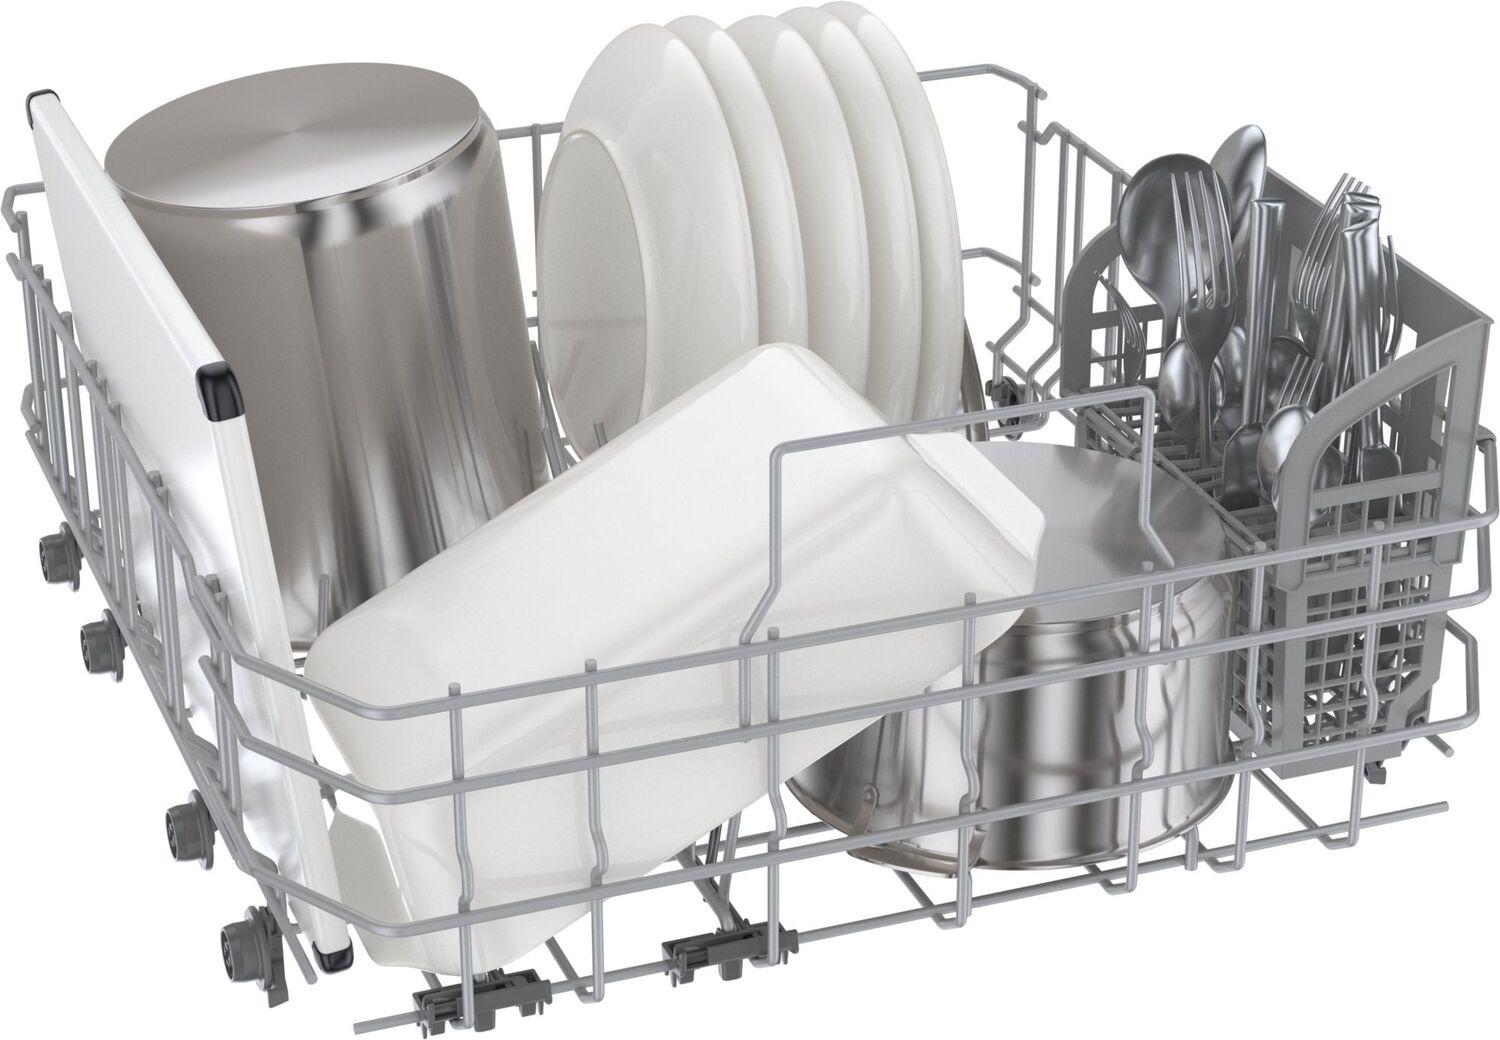 Bosch 300 Series Dishwasher 24" Stainless steel SHE53CE5N